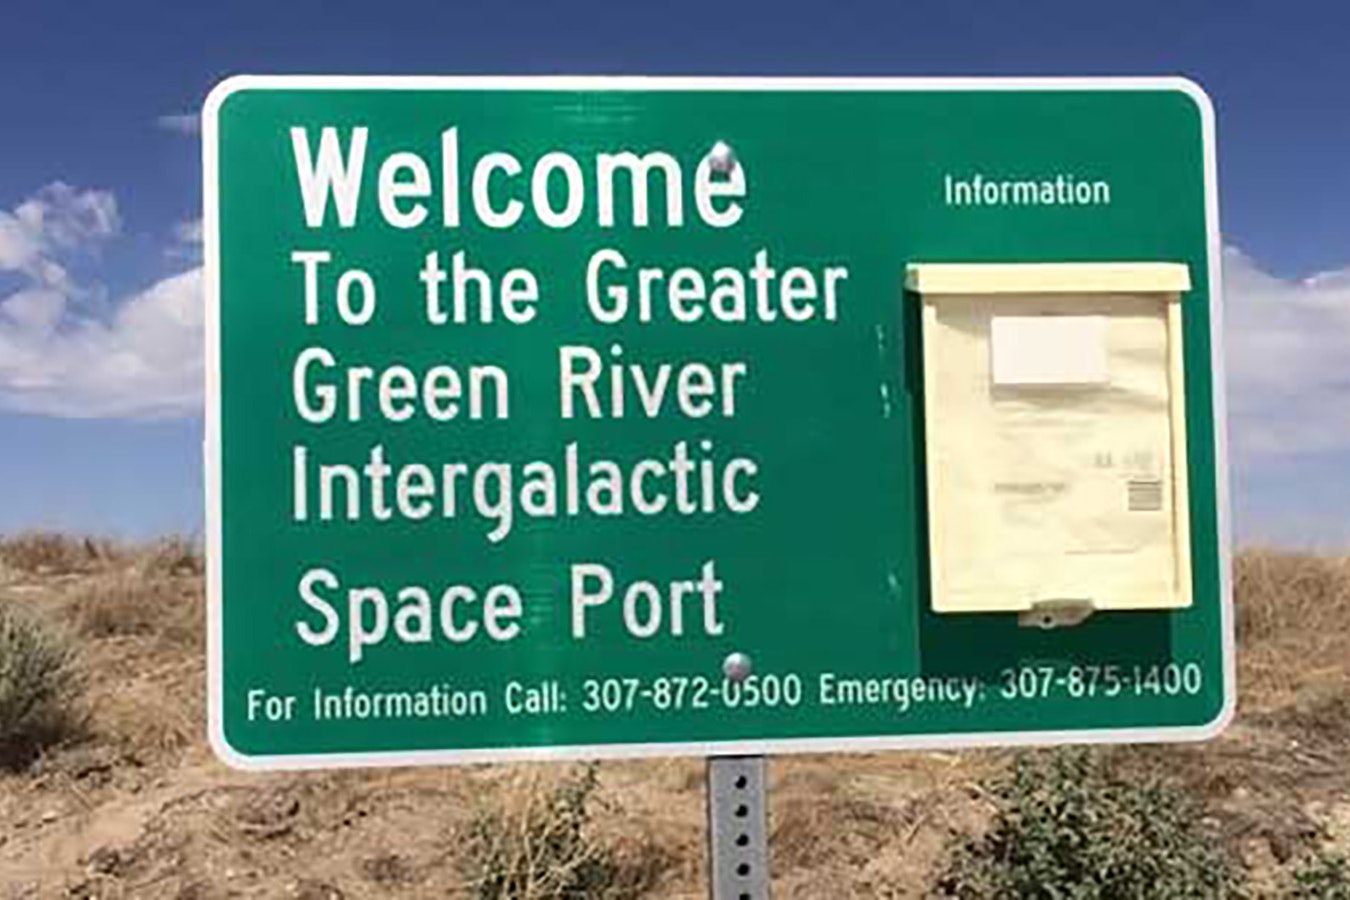 One of the signs greeting people visiting the Greater Green River Intergalactic Spaceport.